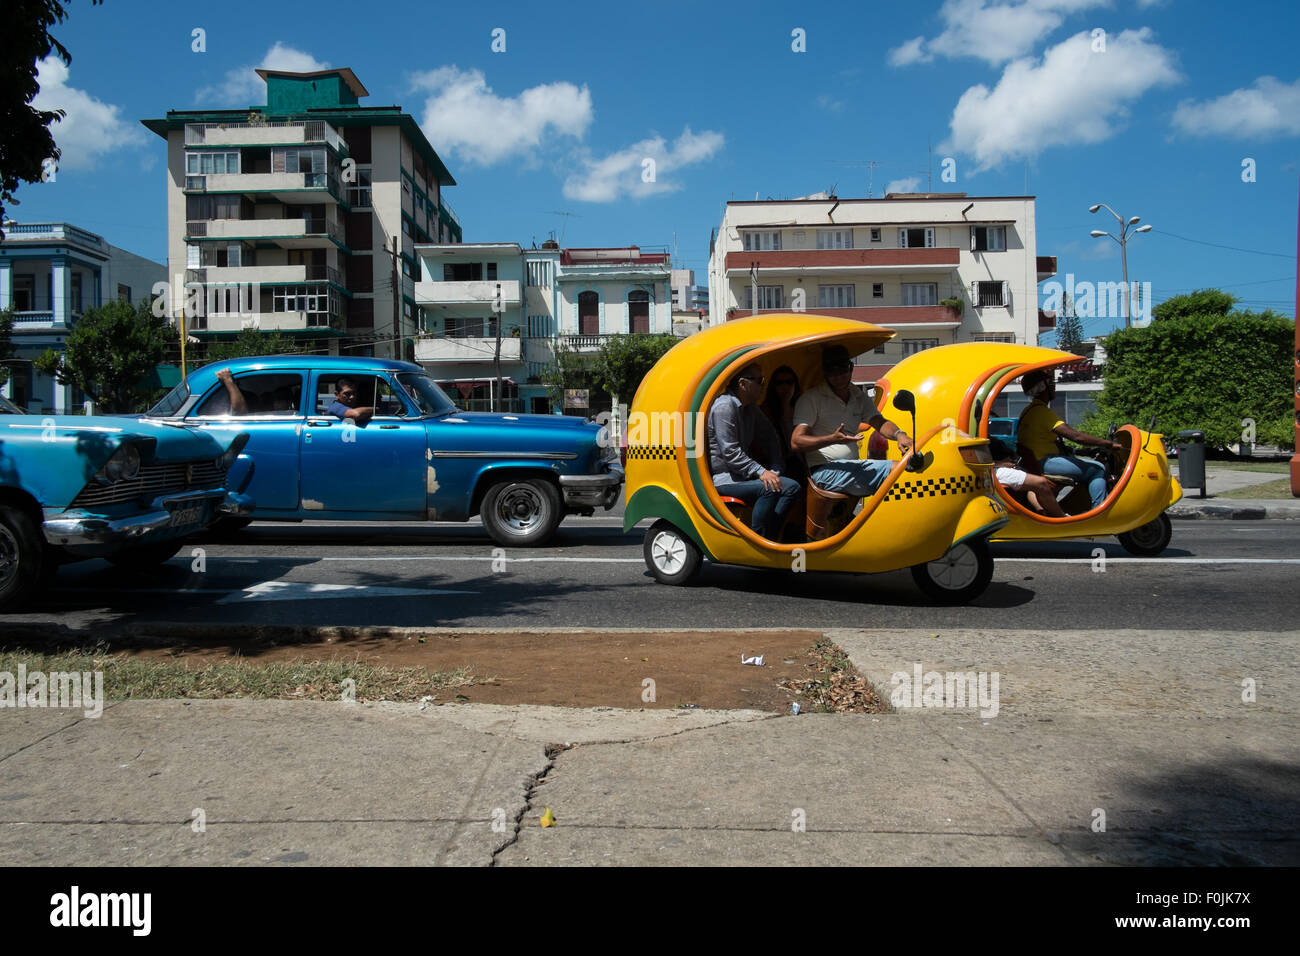 Coco taxis  and classic 1950s cars on the streets of Havana, Cuba Stock Photo